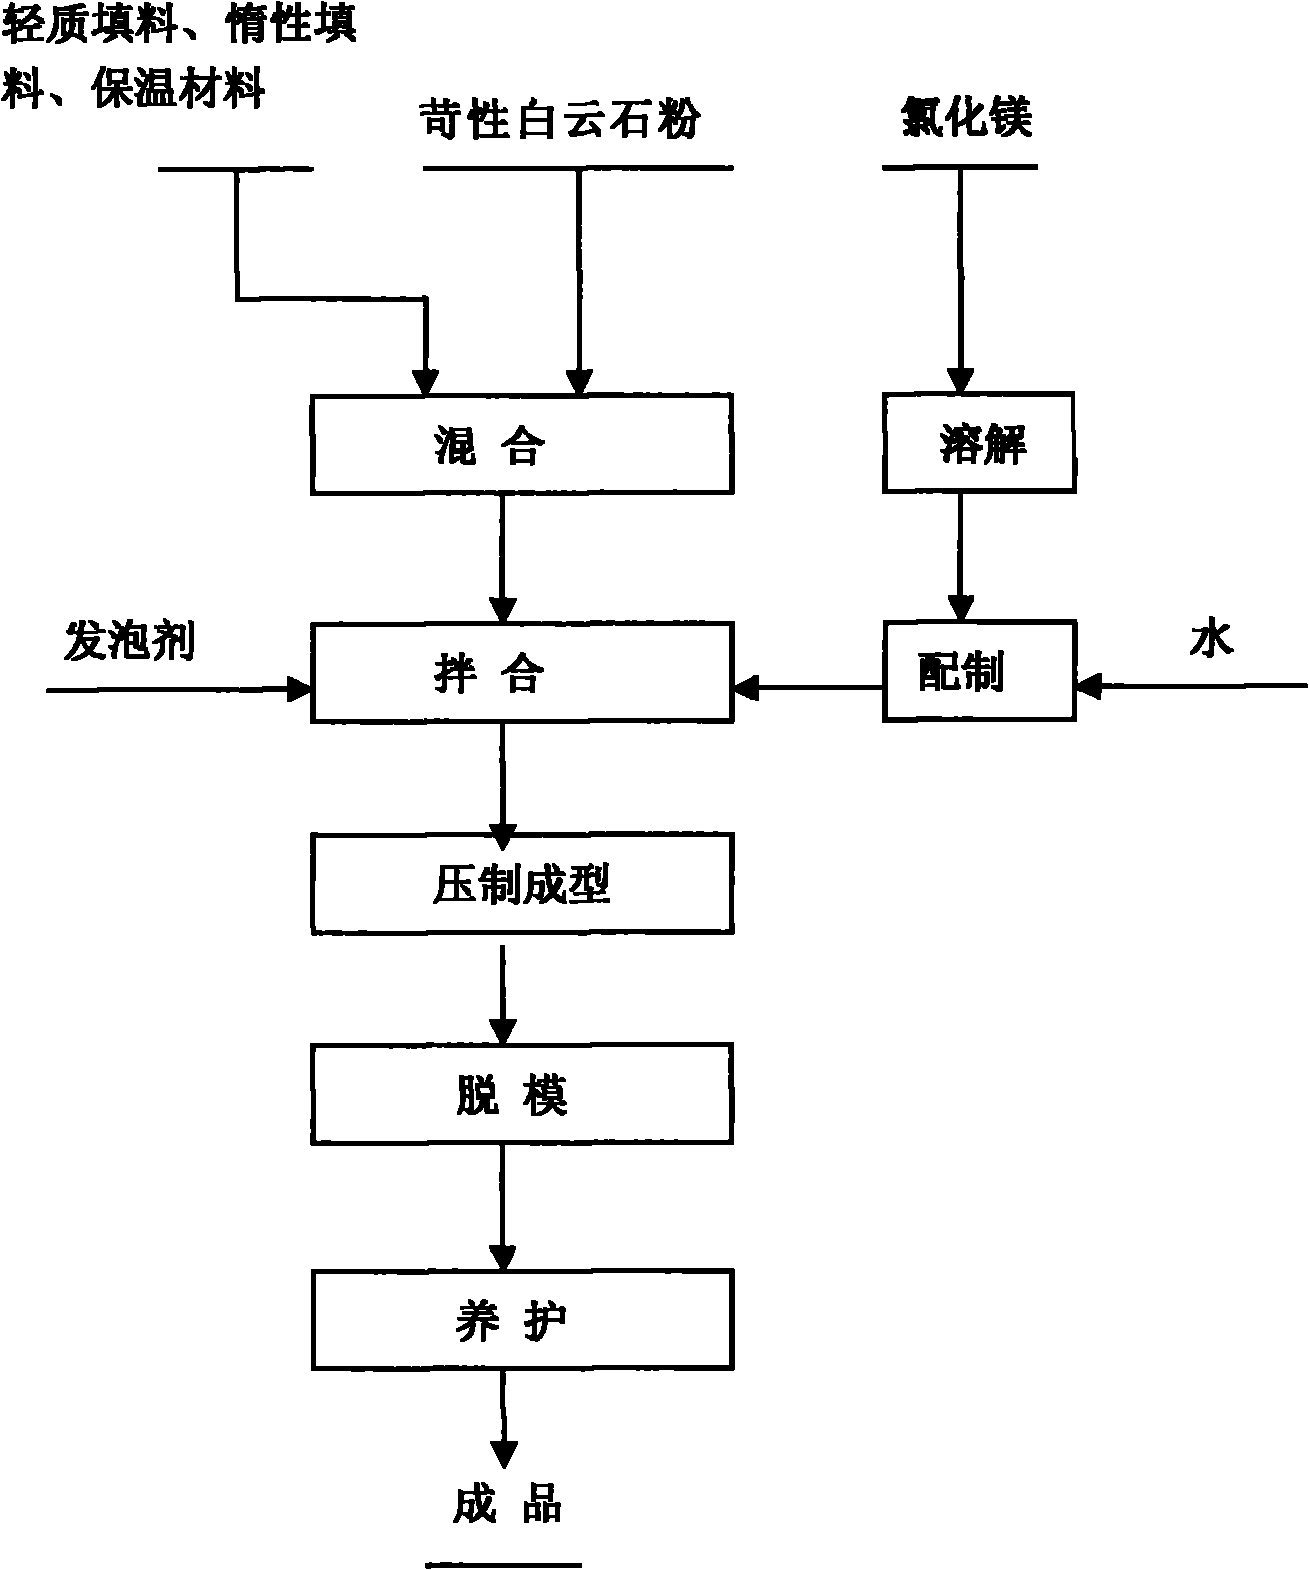 Light dolomite magnesium cement block, baking and steaming-free brick and manufacture method thereof